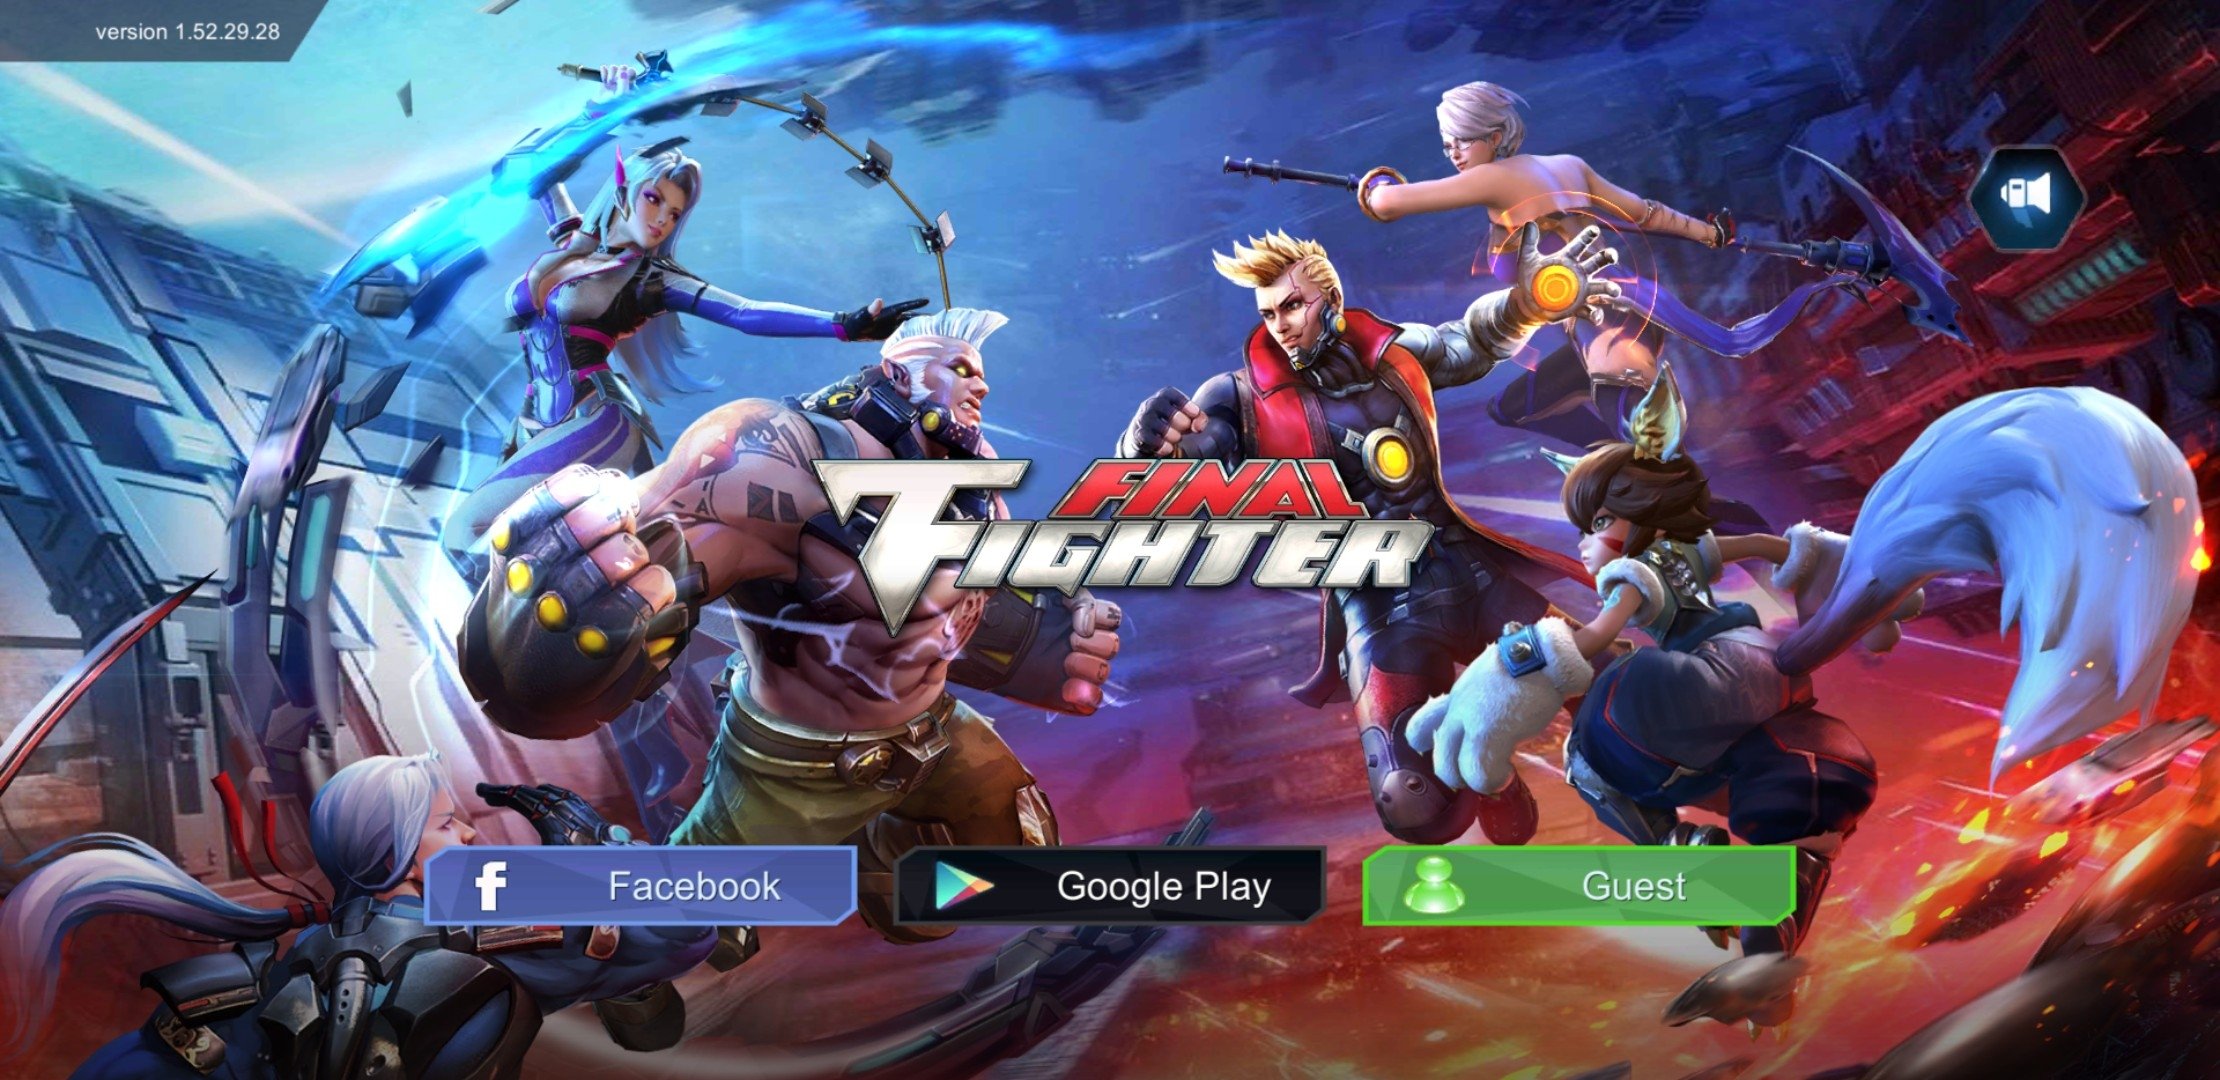 Final Fighter - Fighting Game Android Gameplay ᴴᴰ 